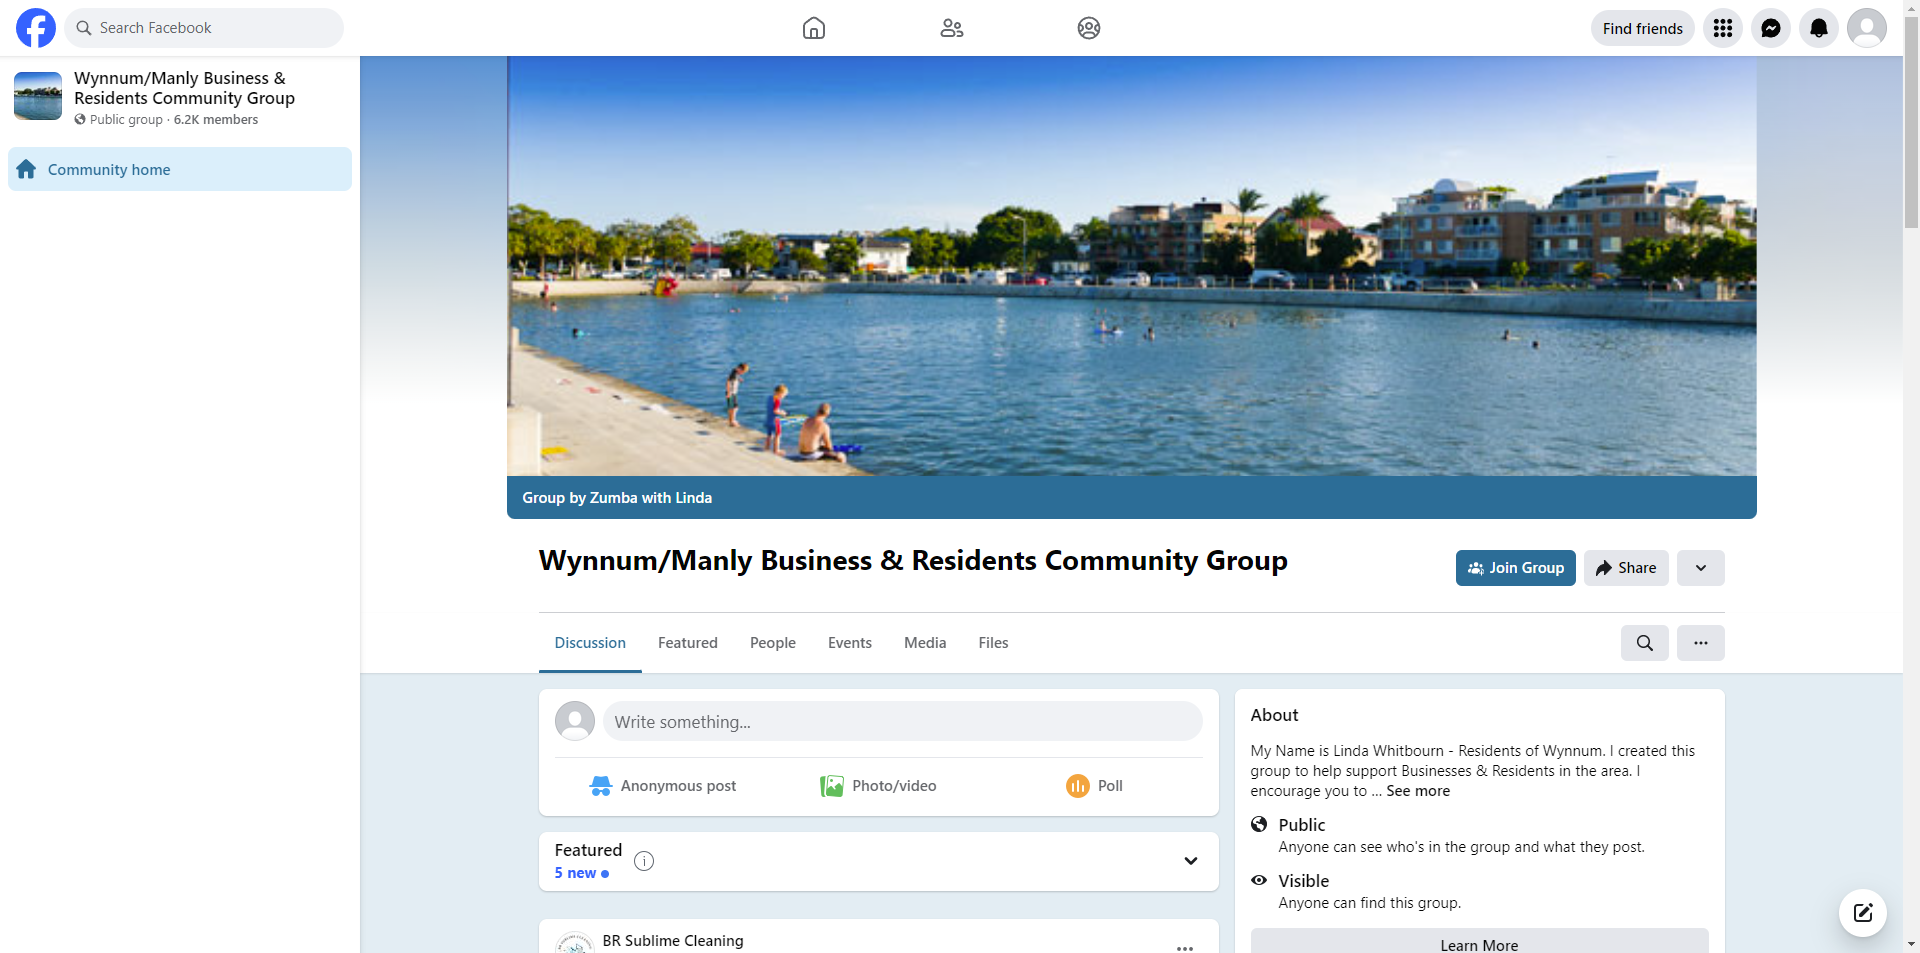 Wynnum/Manly Business & Residents Community Group